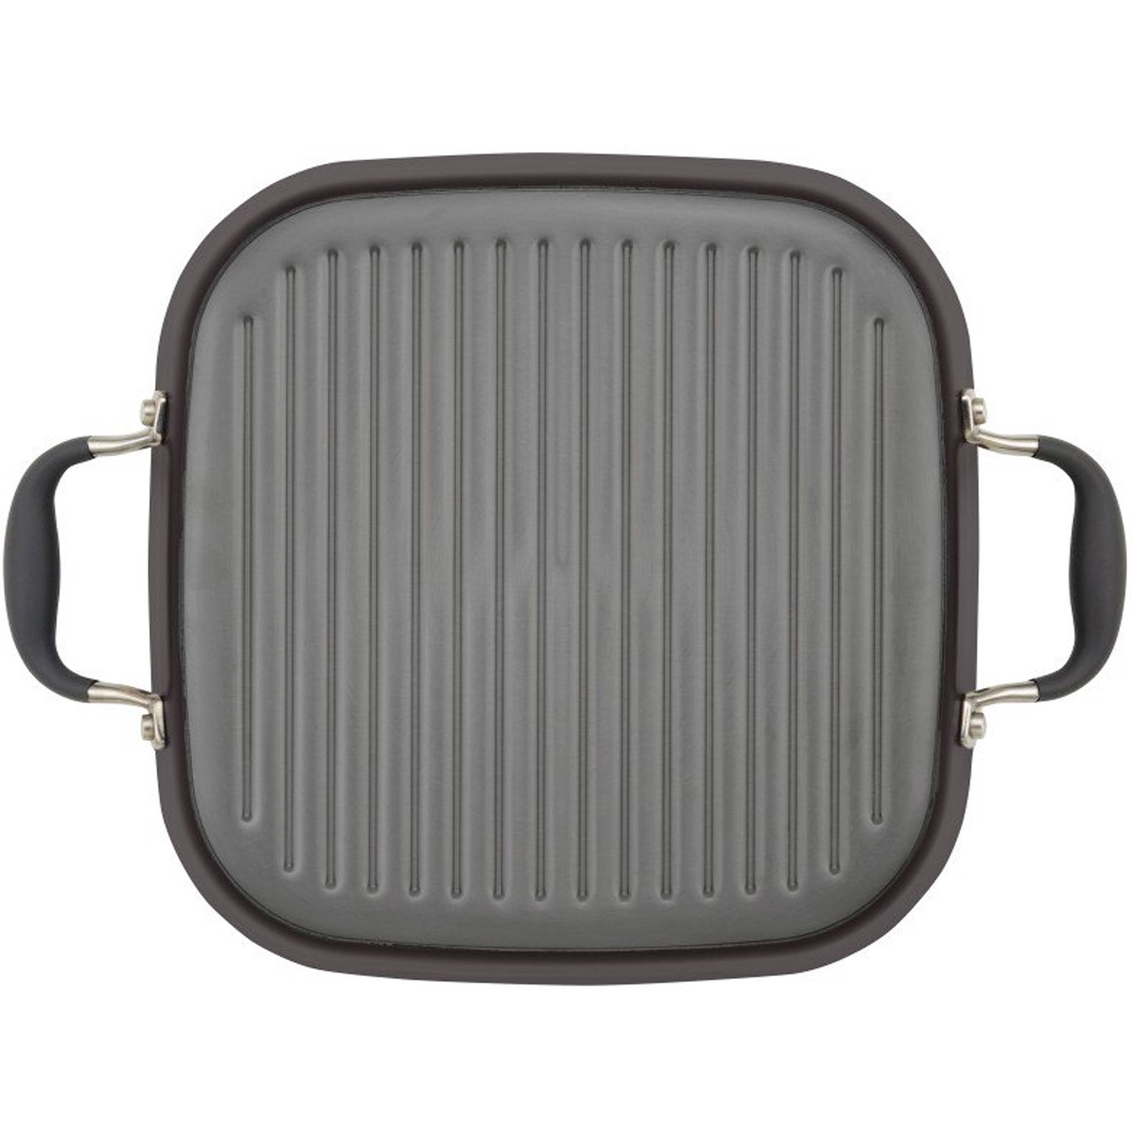 Anolon Advanced Nonstick Deep Square Grill Pan Review